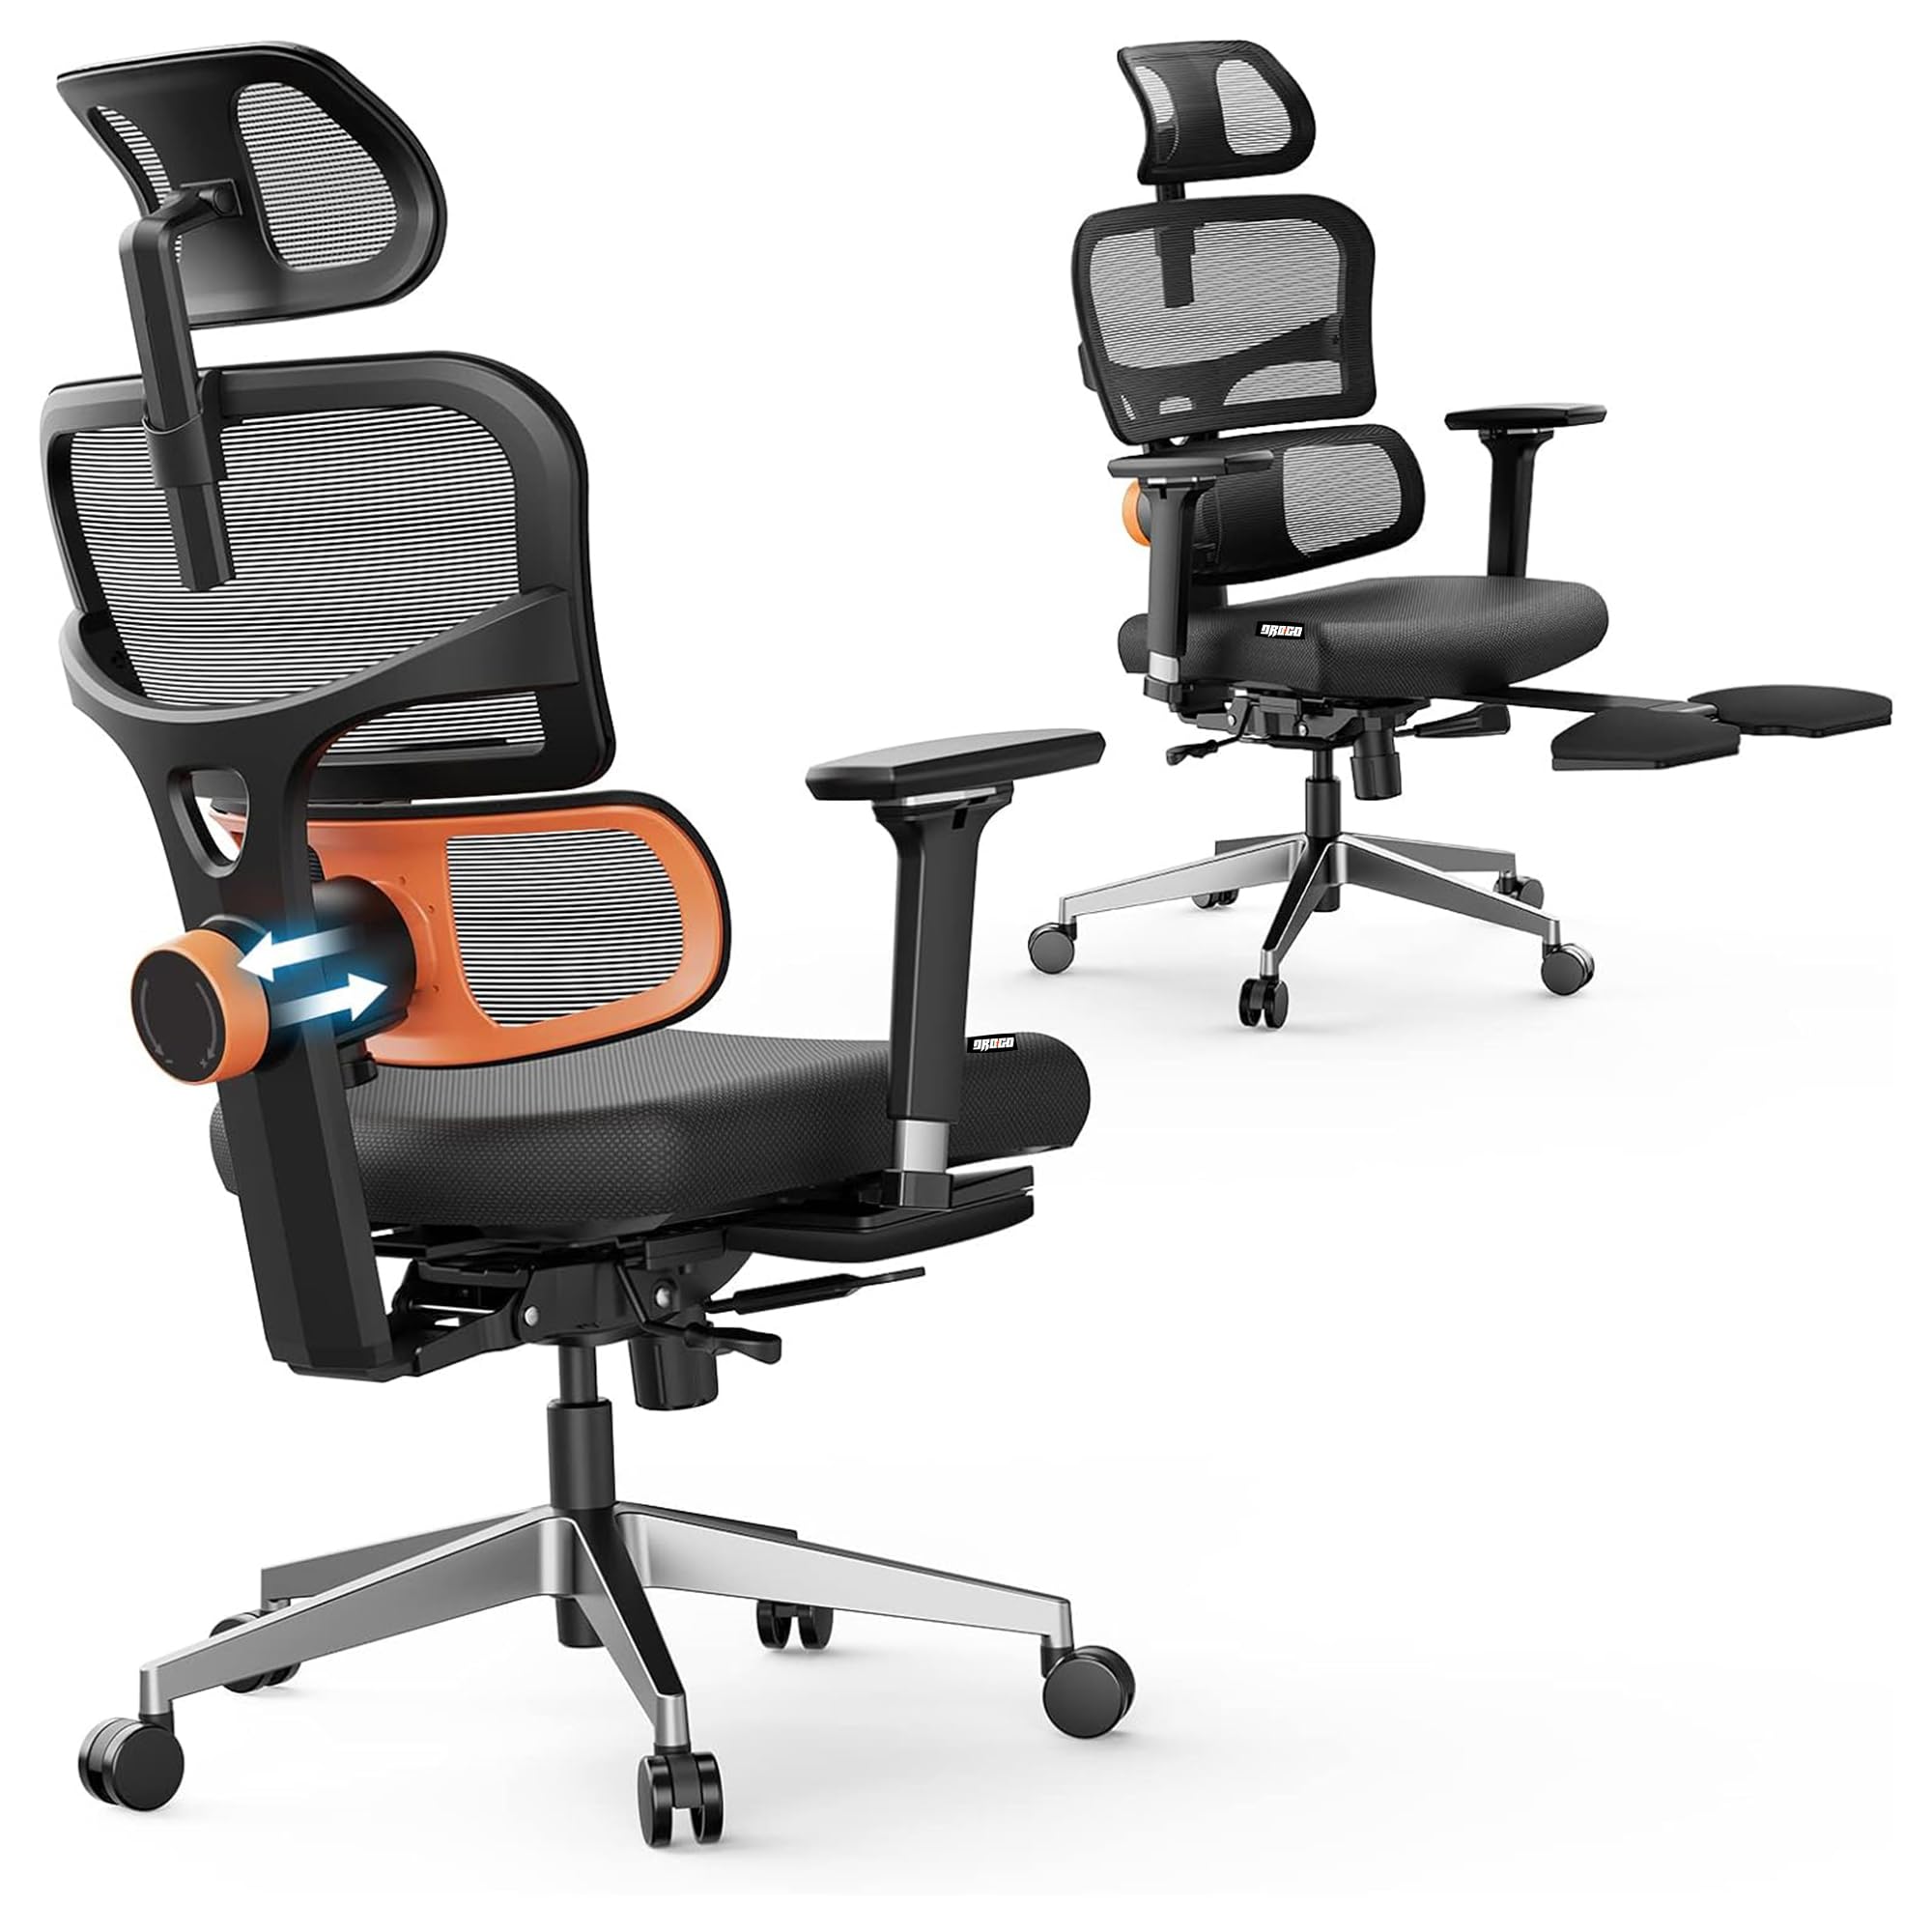 Drogo Premium Ergonomic Office Chair for Work from Home, High Back Computer Chair with Unique Adaptive Lumbar Support & Headrest, 4D Armrest & Recline